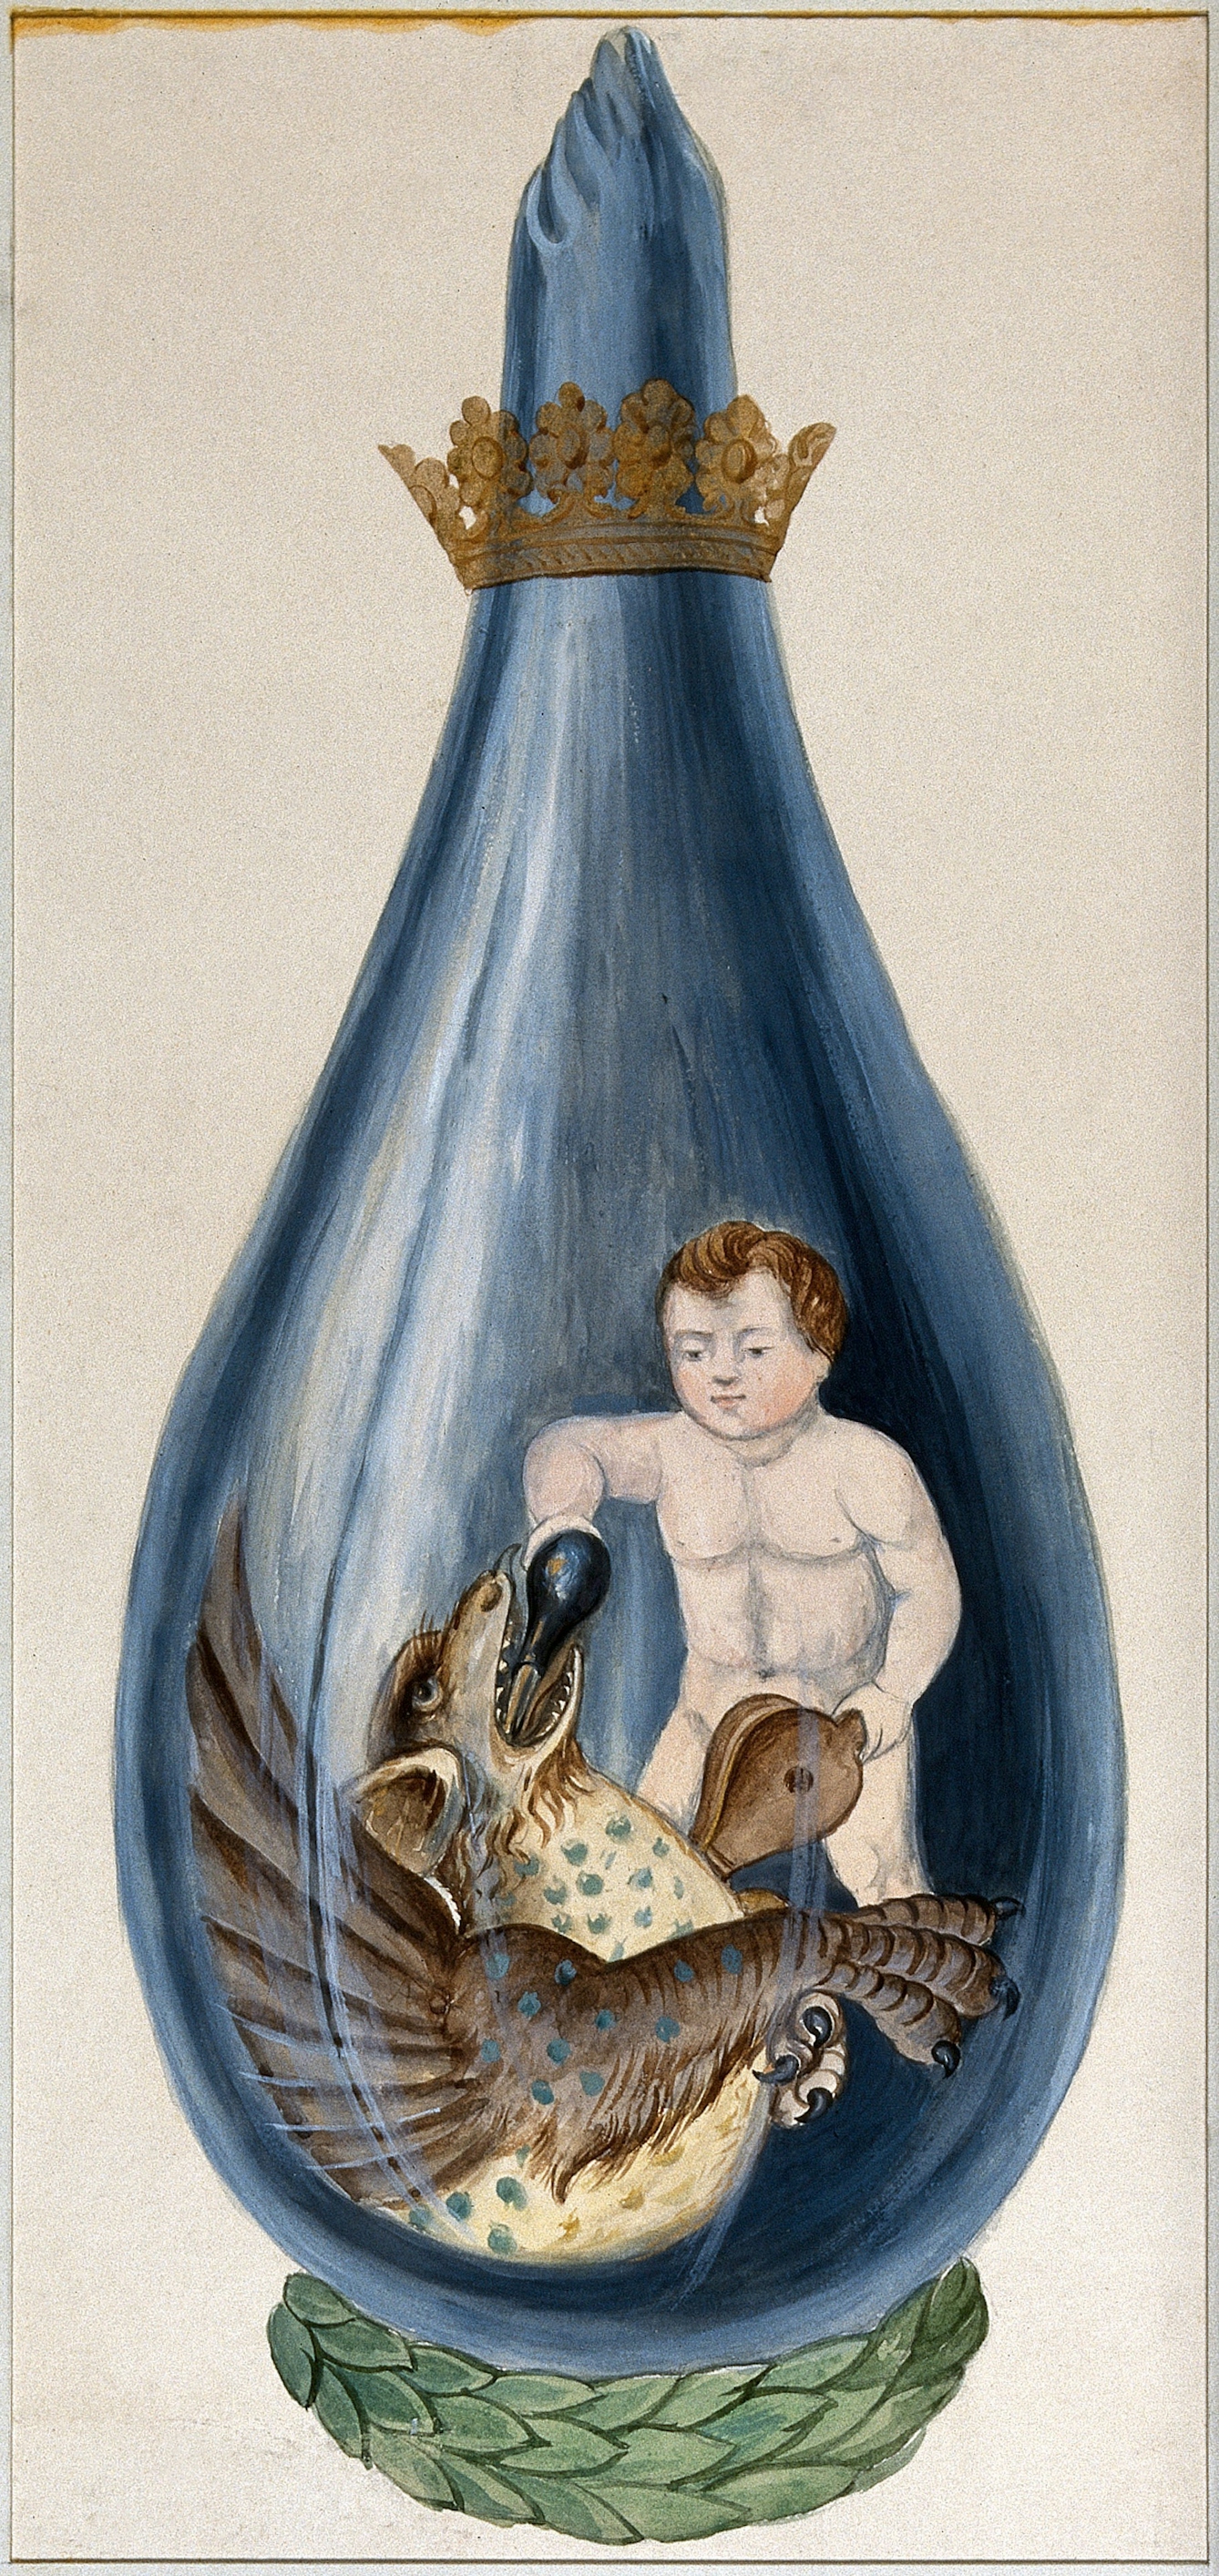 Depicted inside a glass bottle with a crown at the top, a putto pours a phial into a dragon's mouth, pumping a bellows with his other hand.